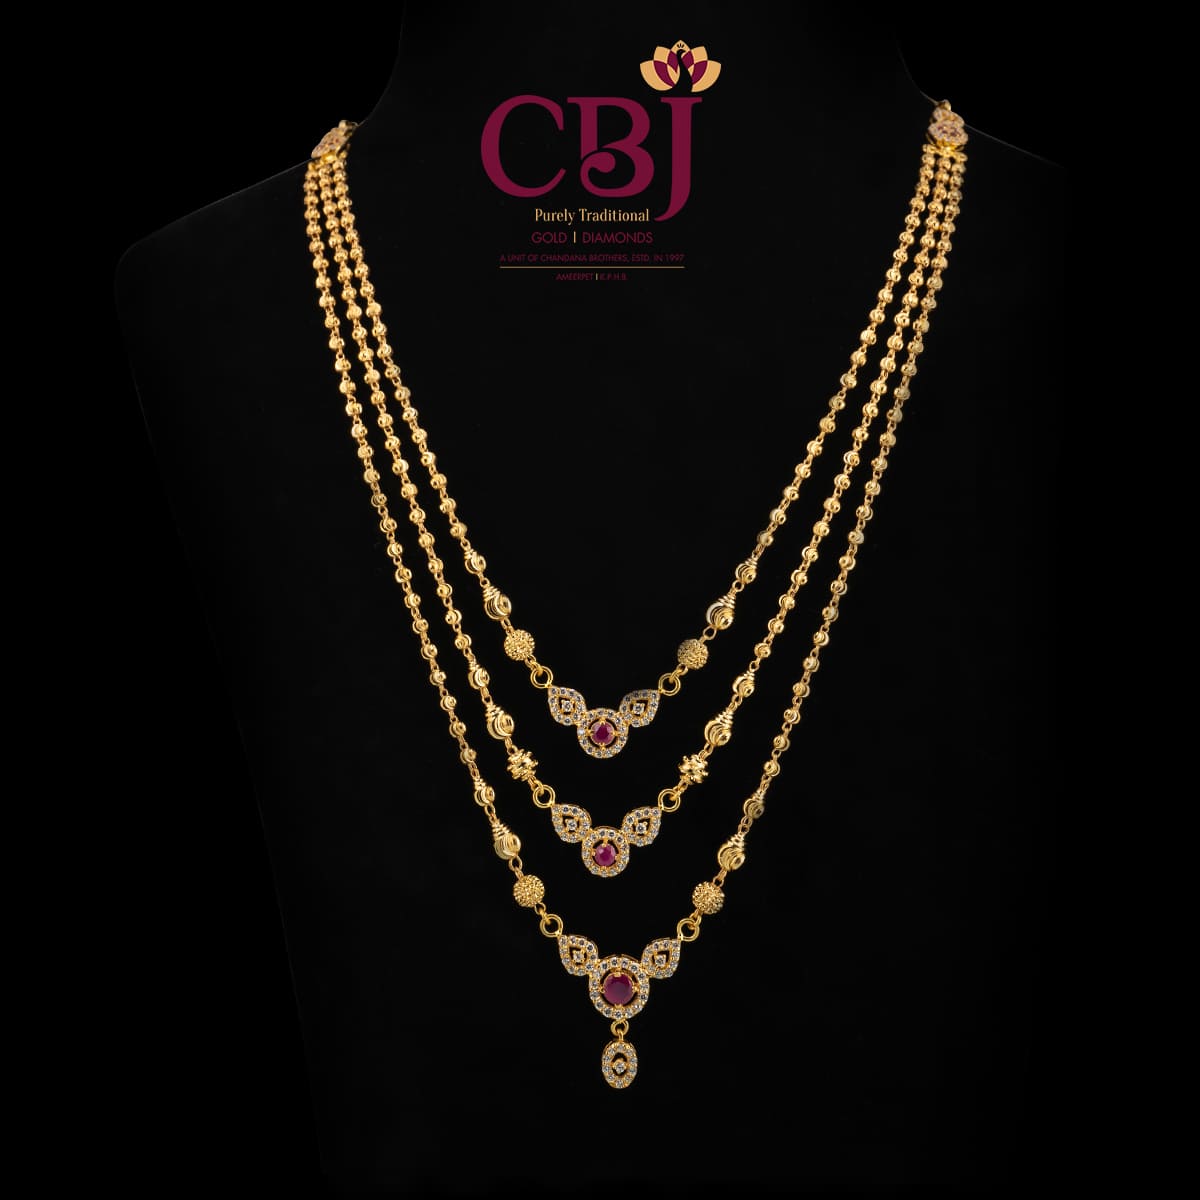 3 line ball chain necklace featuring 3 pendants/centrepiece.